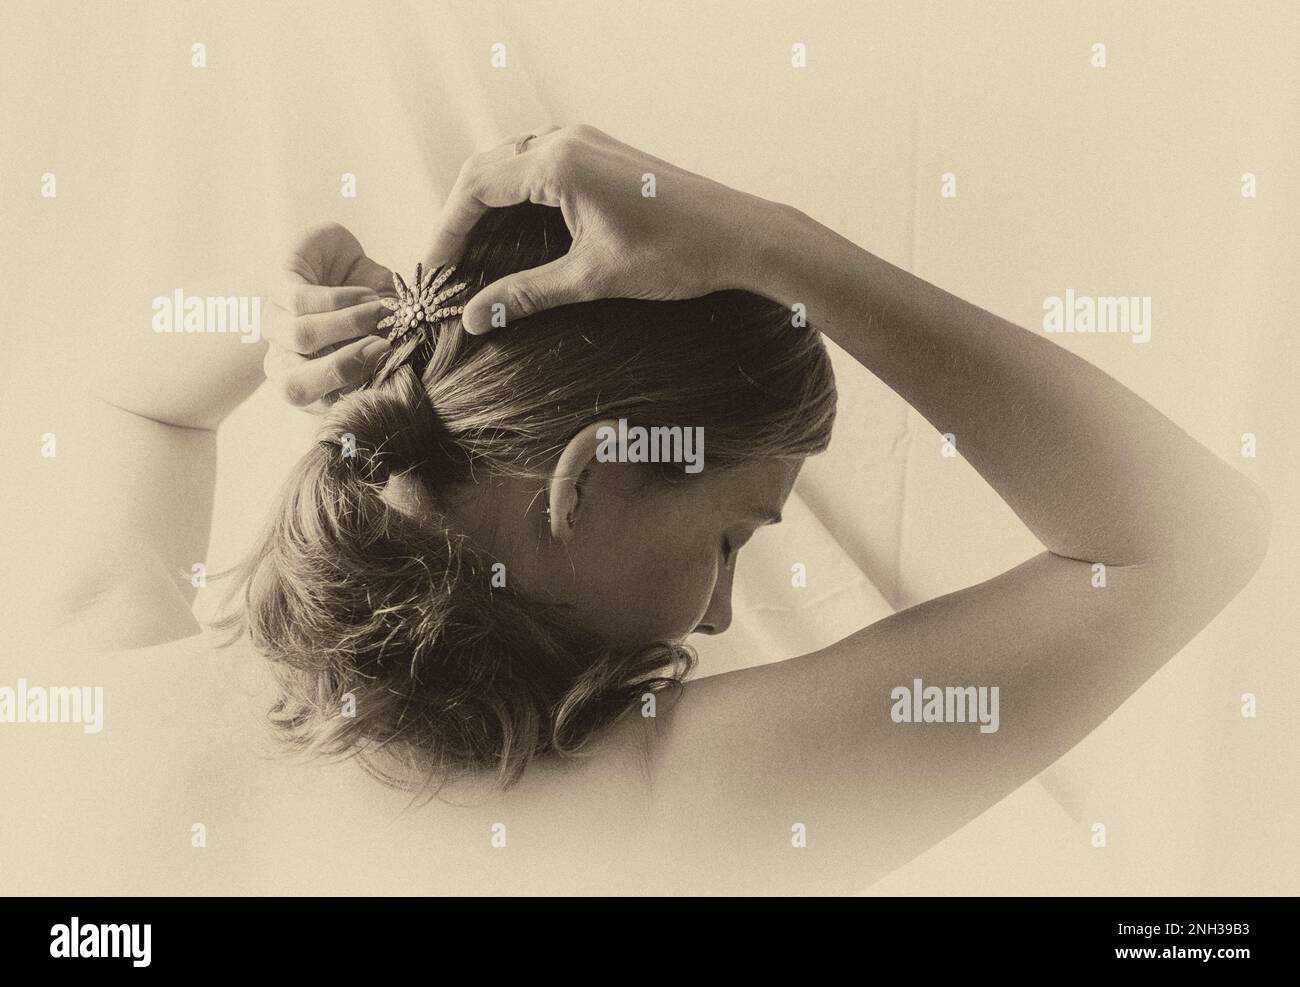 Back view of young woman fixing her hair. Stock Photo